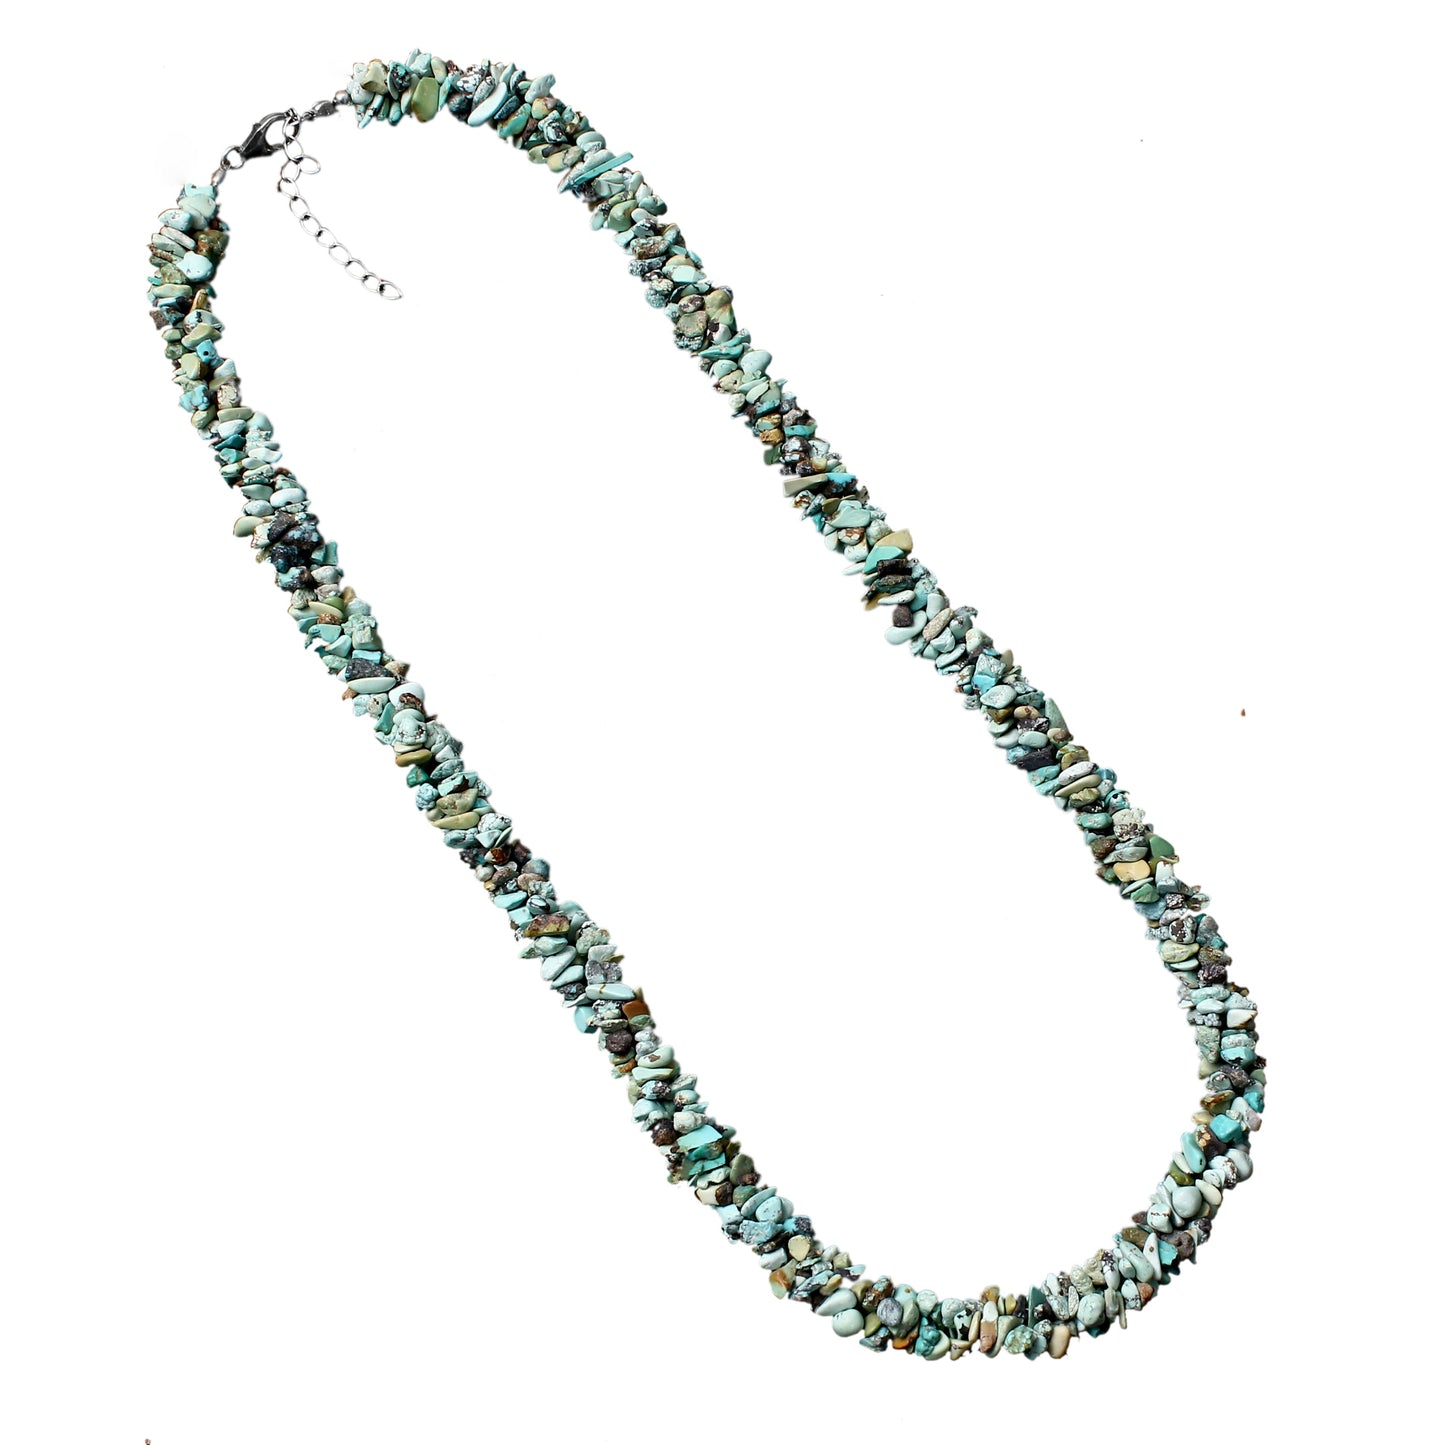 Natural Turquoise Chips Beaded Necklace, Turquoise Jewelry, Handmade Beads Necklace, Multi strand Rope Necklace. GemsRush